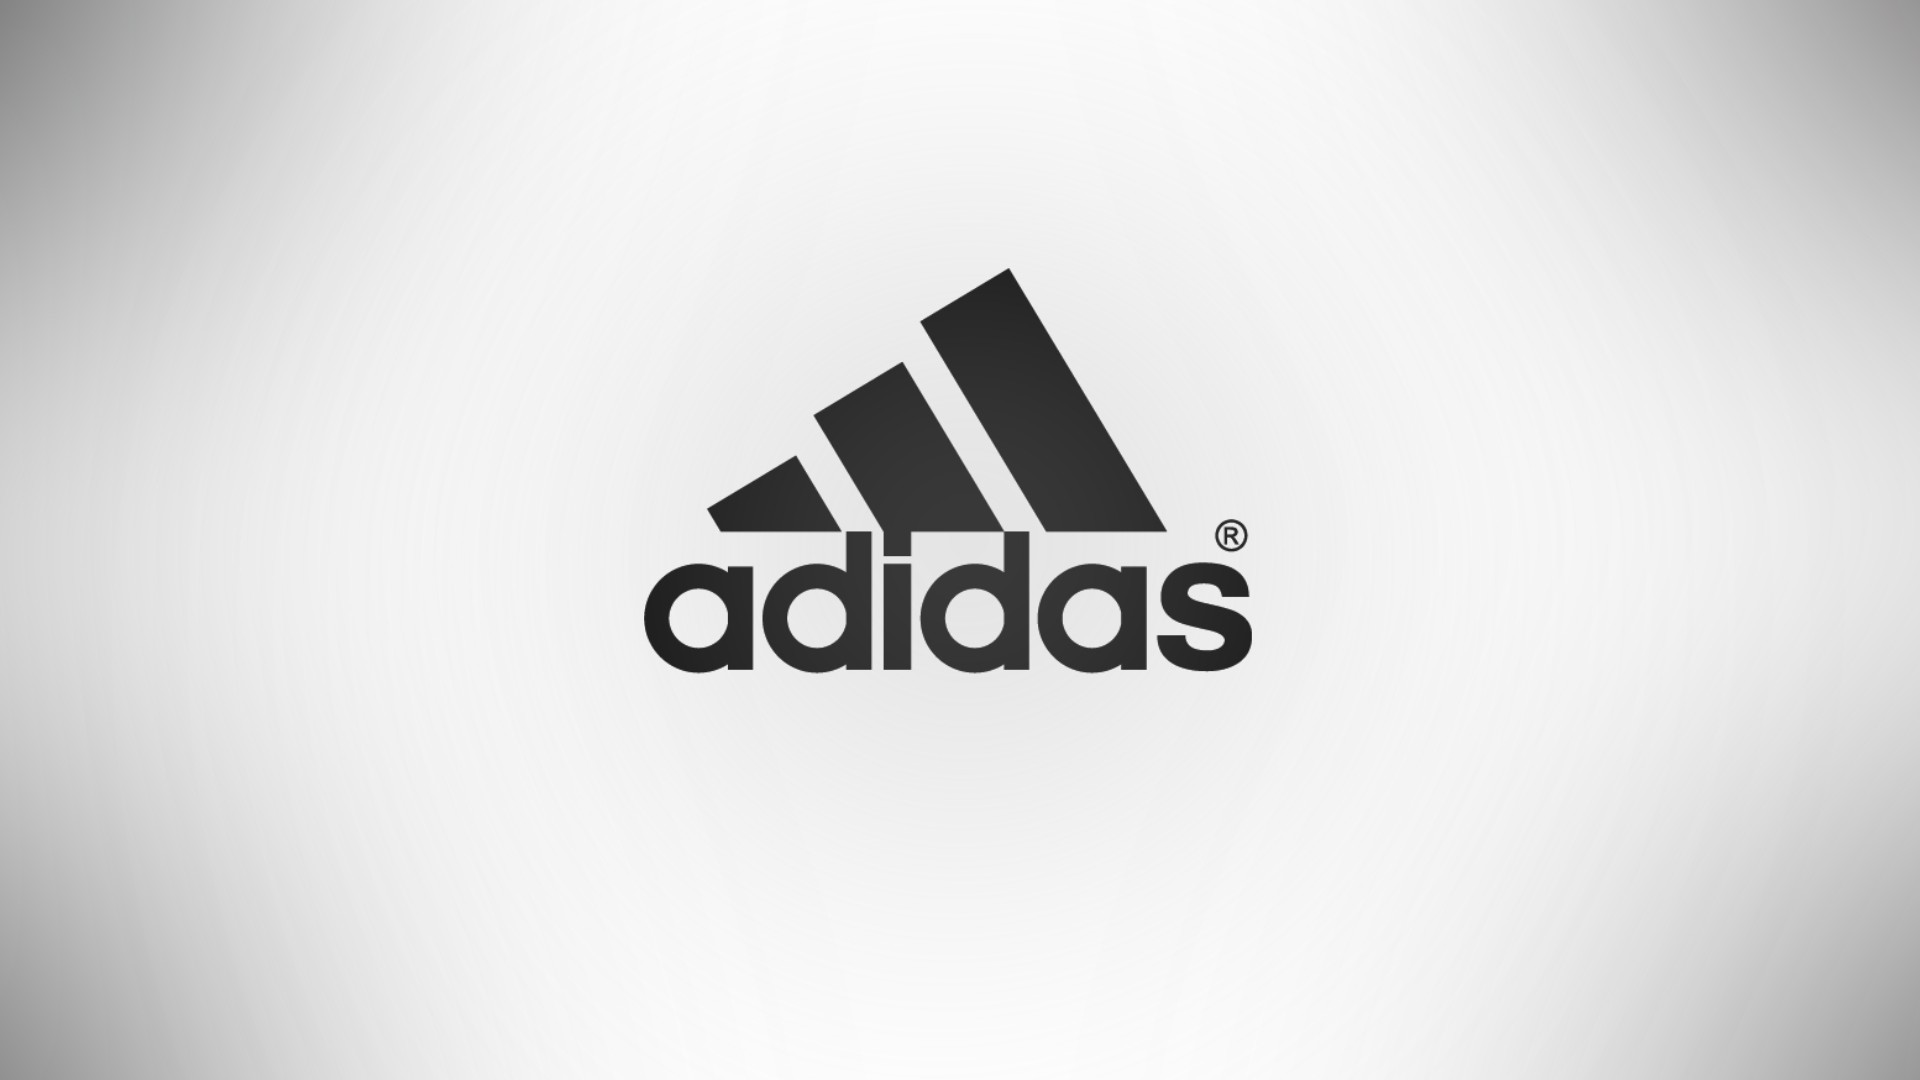 Wallpaper Adidas Logo With high-resolution 1920X1080 pixel. You can use this wallpaper for your Windows and Mac OS computers as well as your Android and iPhone smartphones